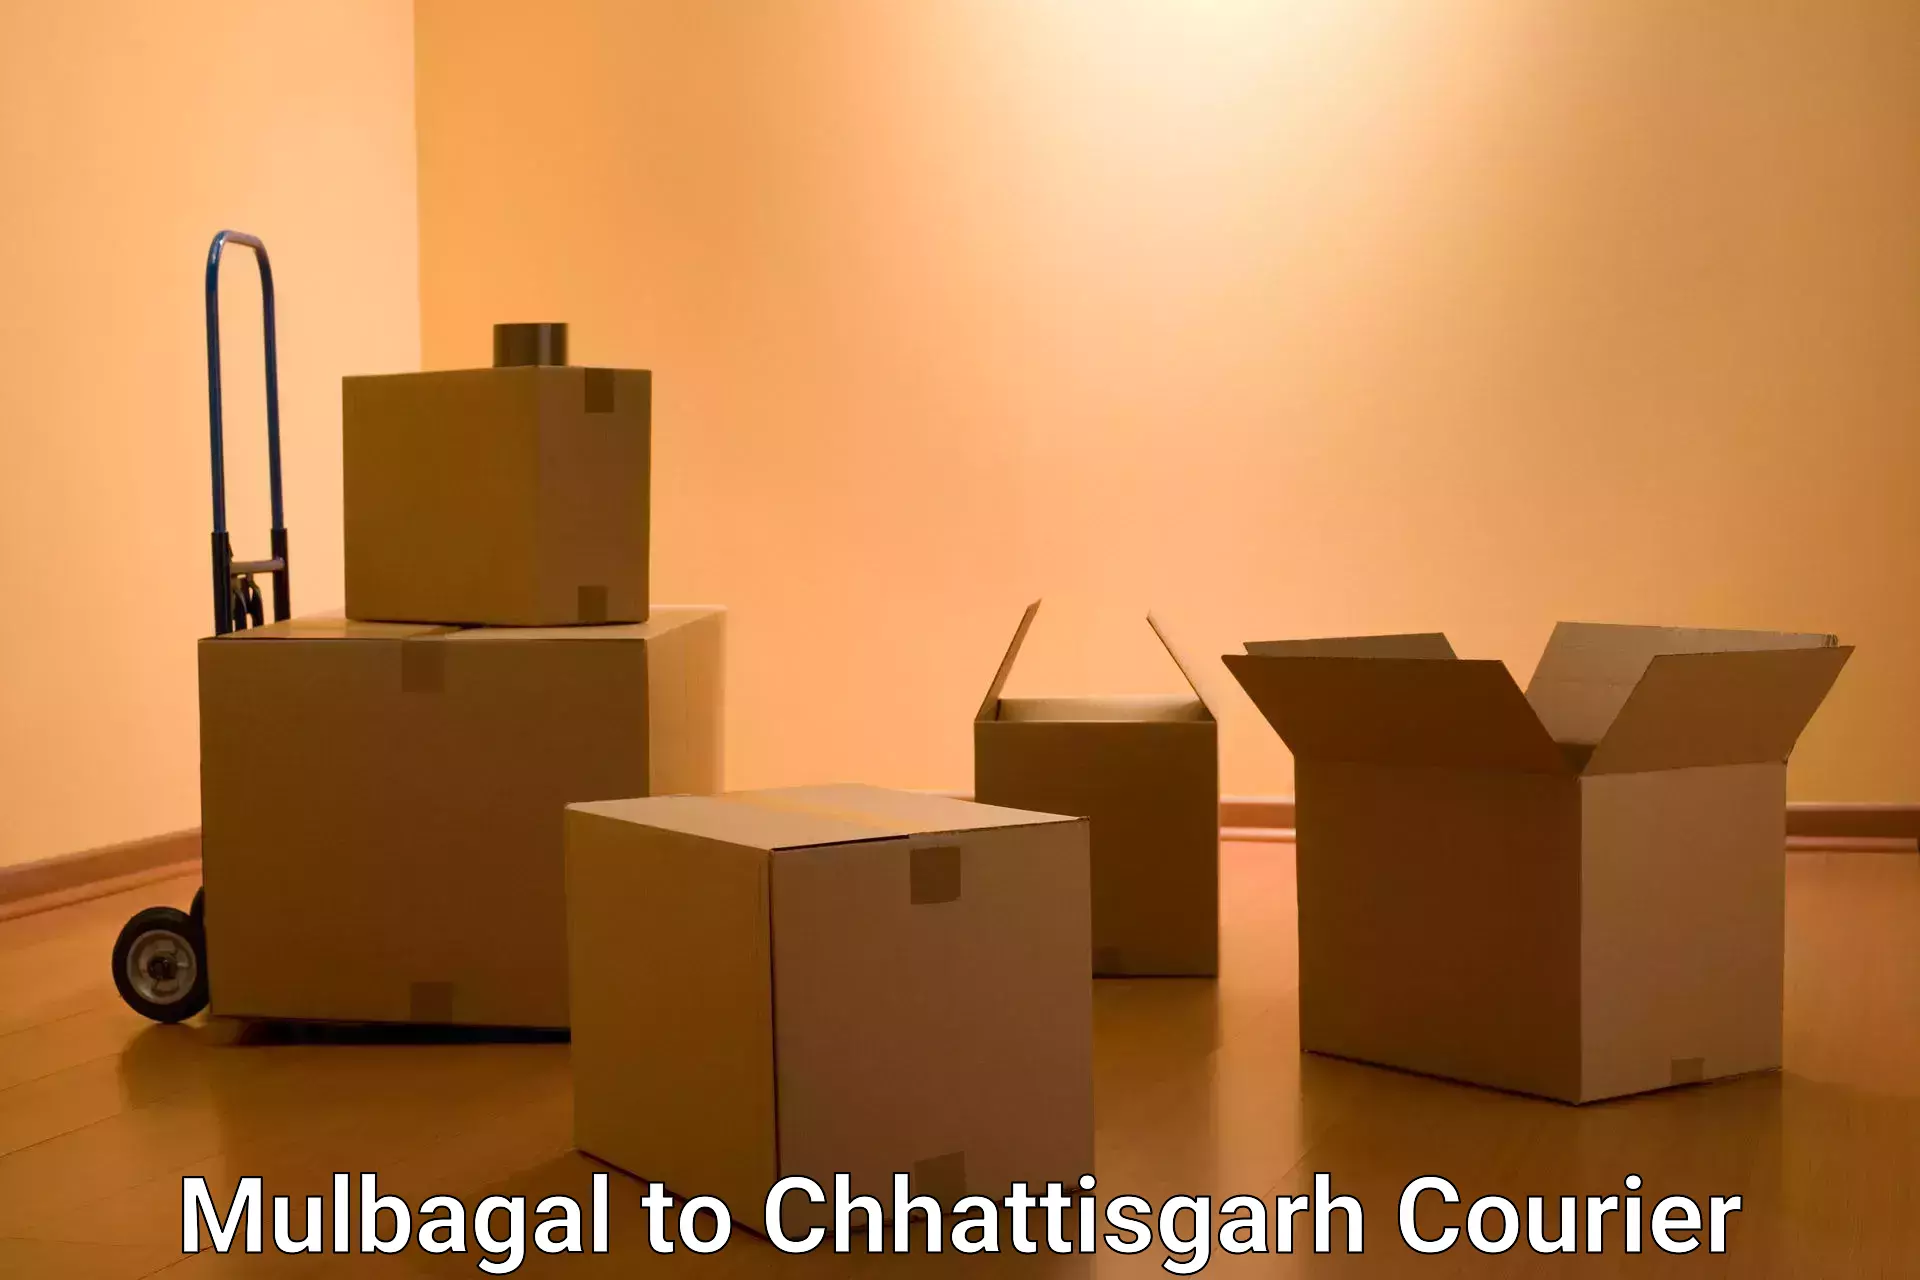 Special handling courier Mulbagal to Patna Chhattisgarh